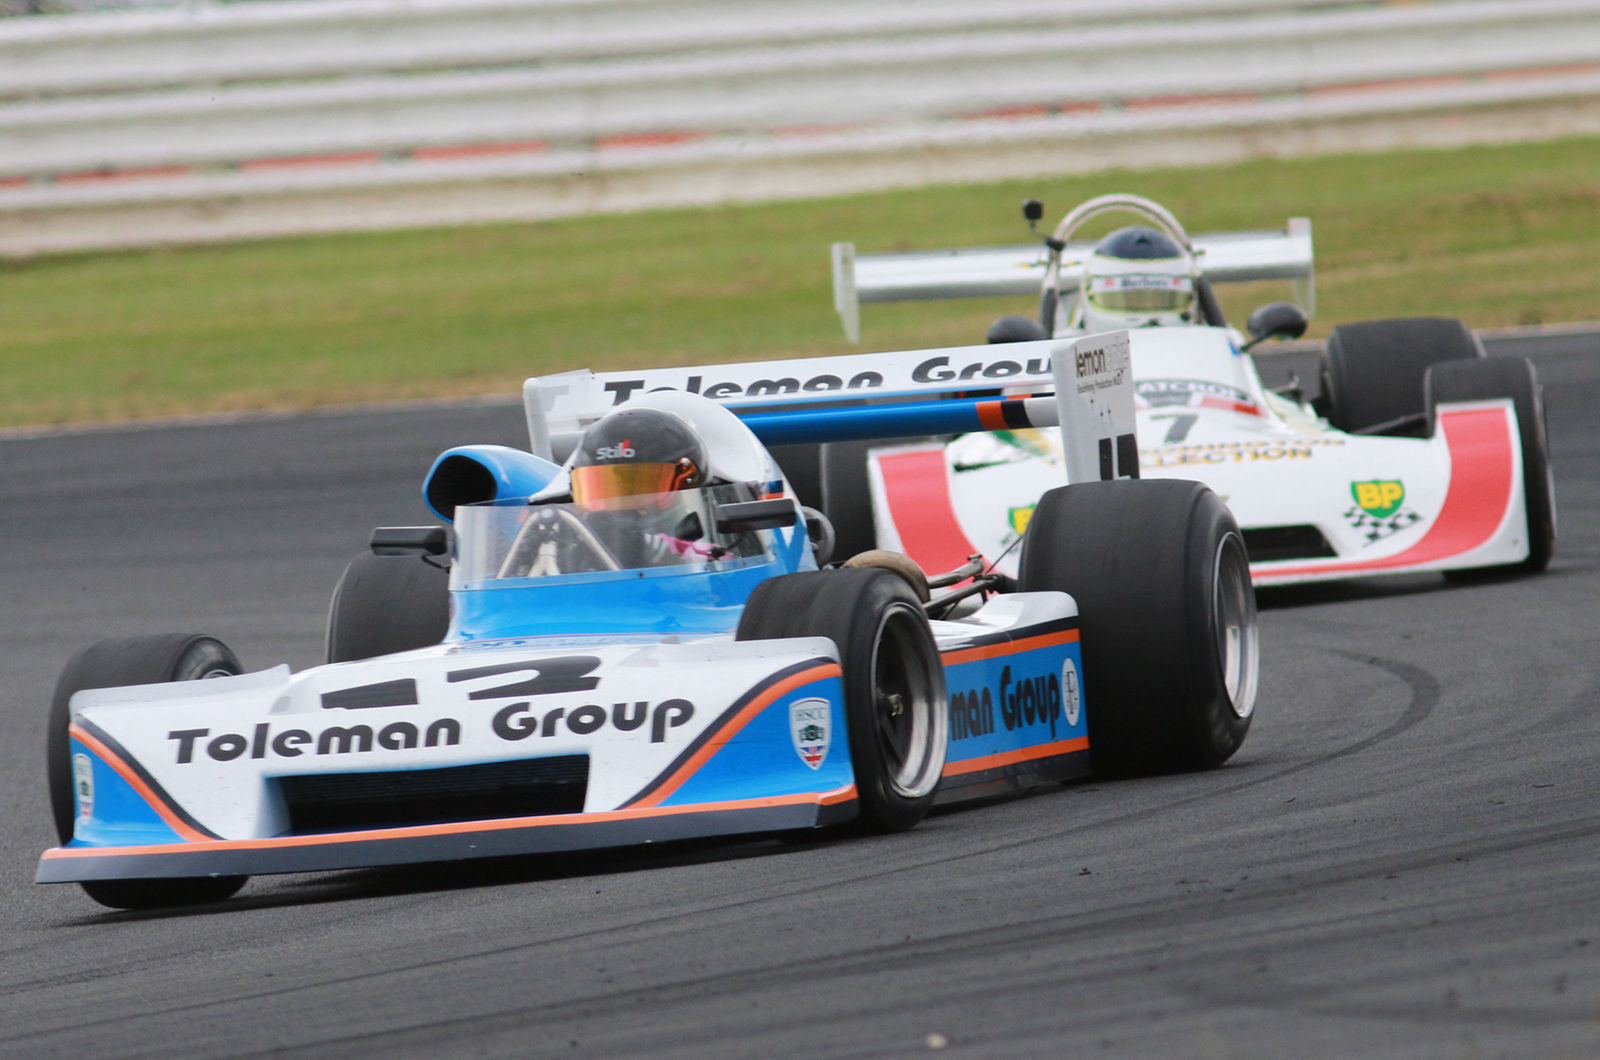 Classic & Sports Car – Single-seaters to star at 2019 Silverstone Classic